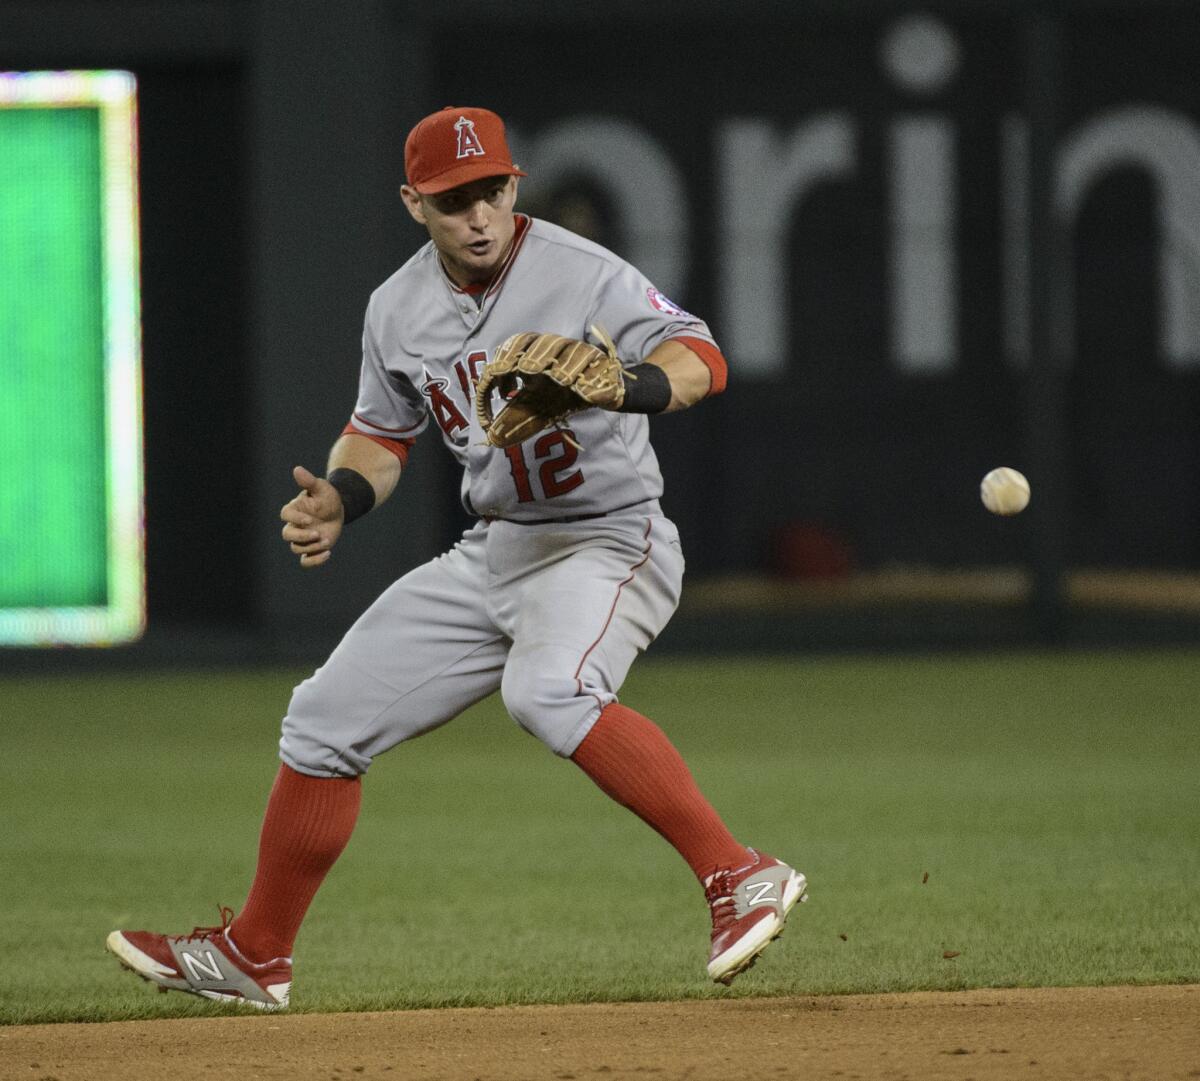 Angels second baseman Johnny Giavotella reaches for a grounder during a game against the Kansas City Royals on Aug. 14.